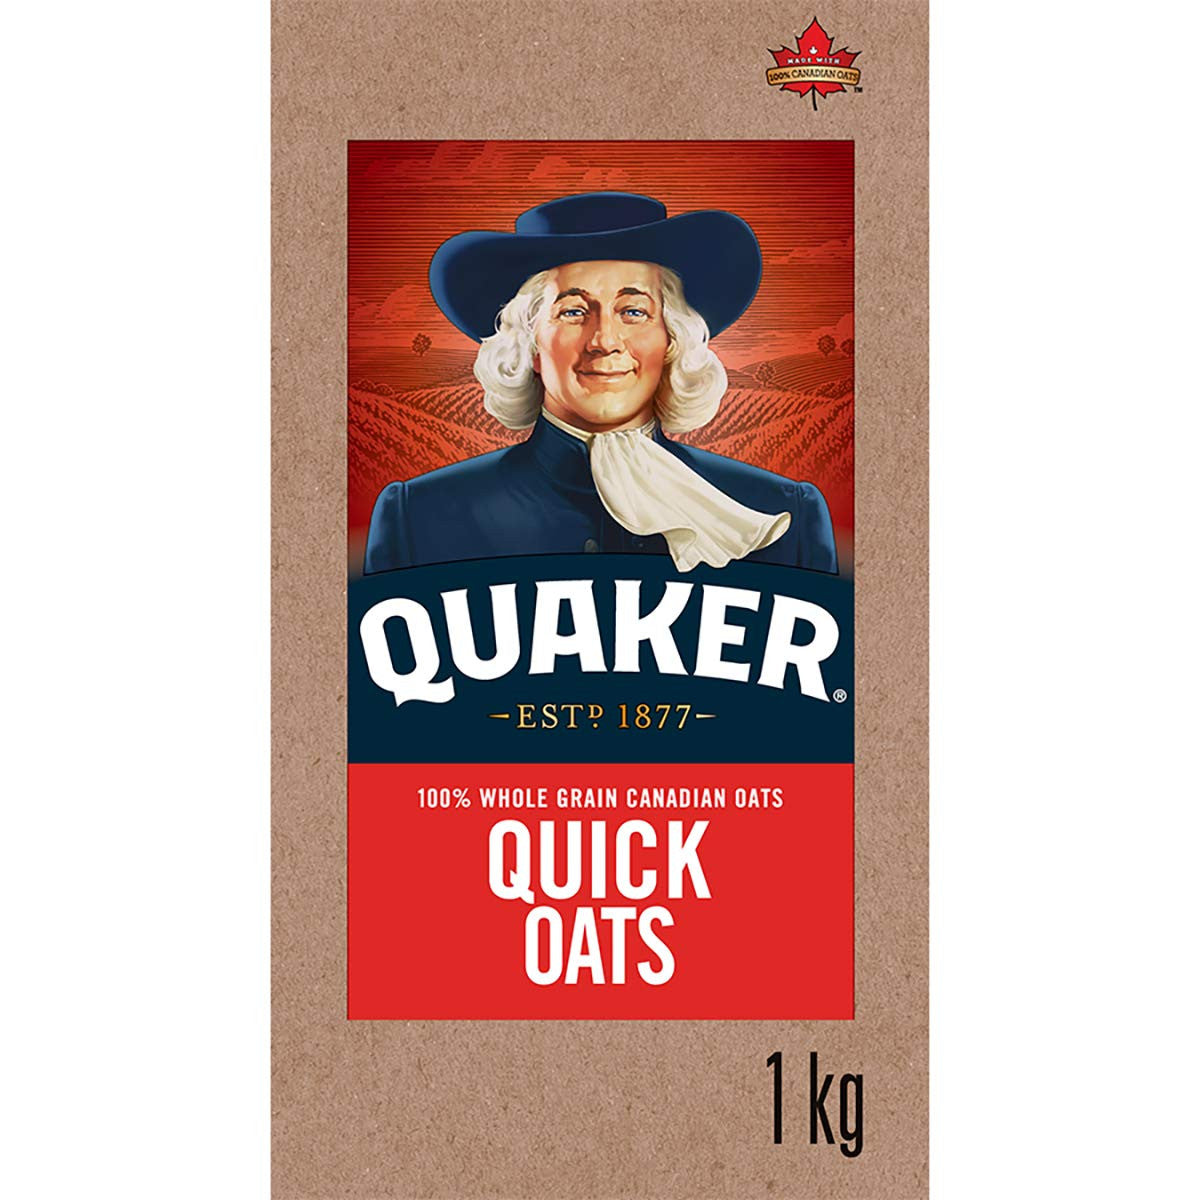 Standard Quaker Quick Oats 1 Kg/2.2 lbs., {Imported from Canada}